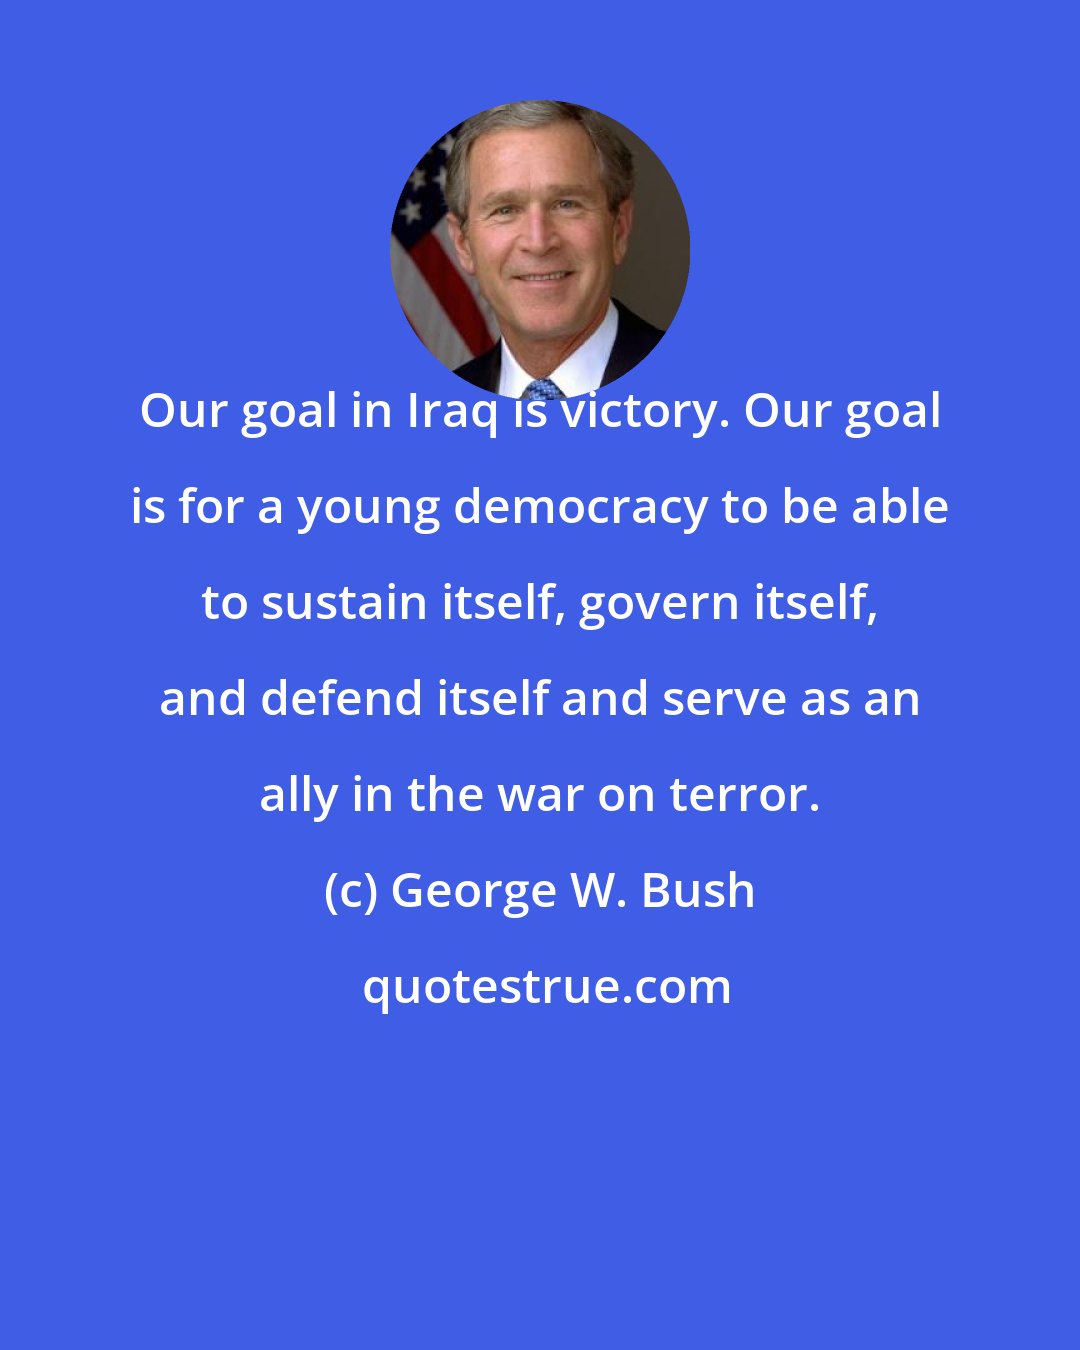 George W. Bush: Our goal in Iraq is victory. Our goal is for a young democracy to be able to sustain itself, govern itself, and defend itself and serve as an ally in the war on terror.